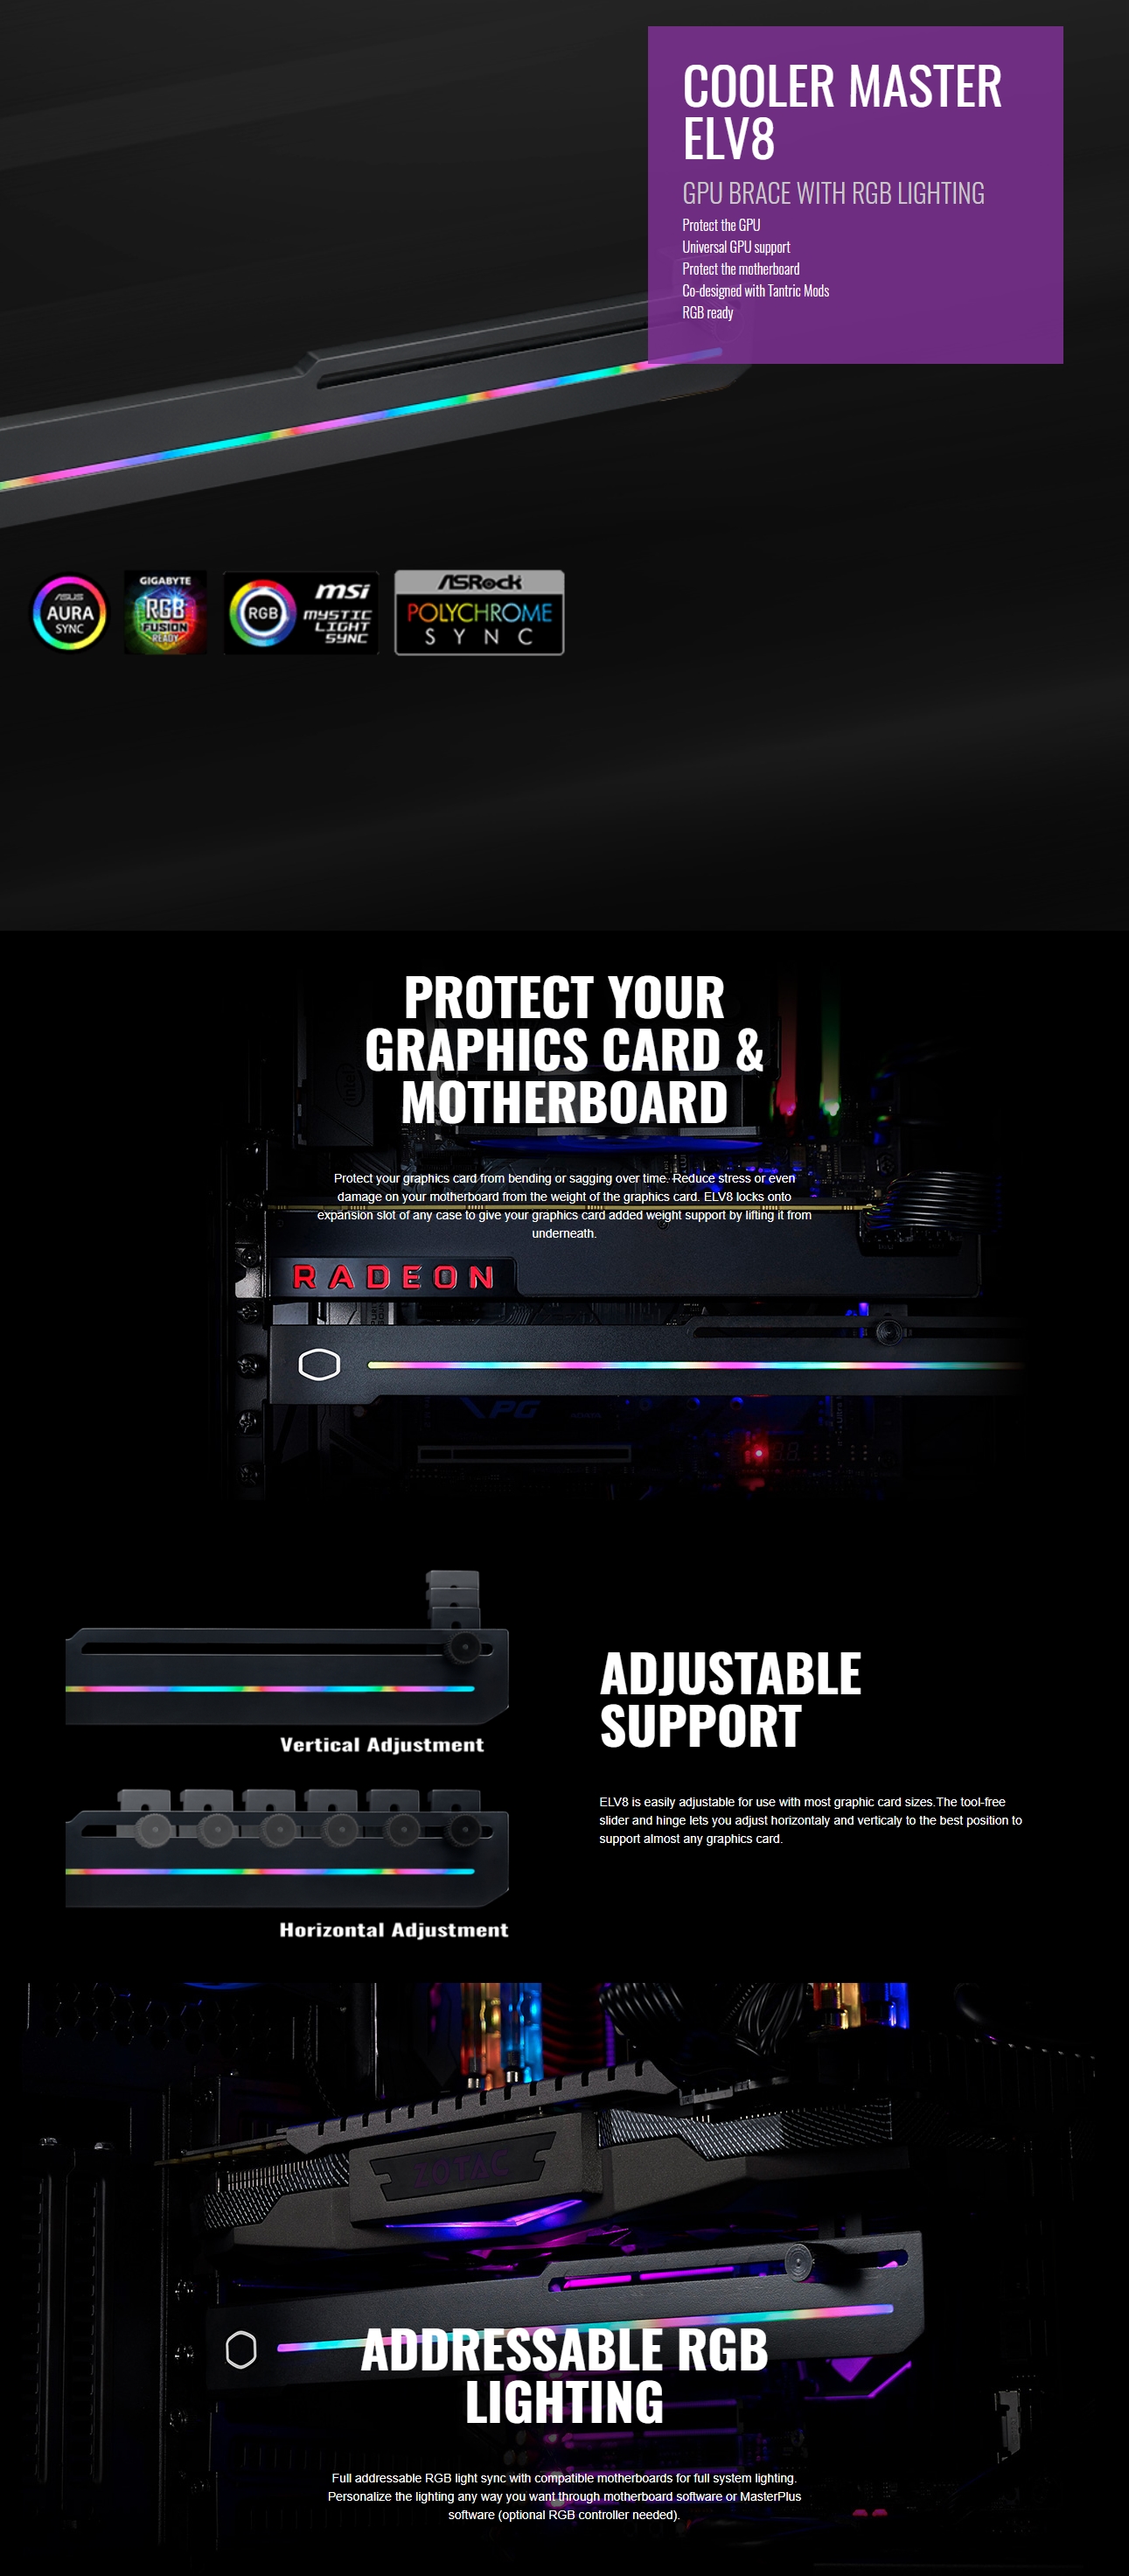 A large marketing image providing additional information about the product Cooler Master ELV8 RGB Graphics Card Brace Support - Additional alt info not provided